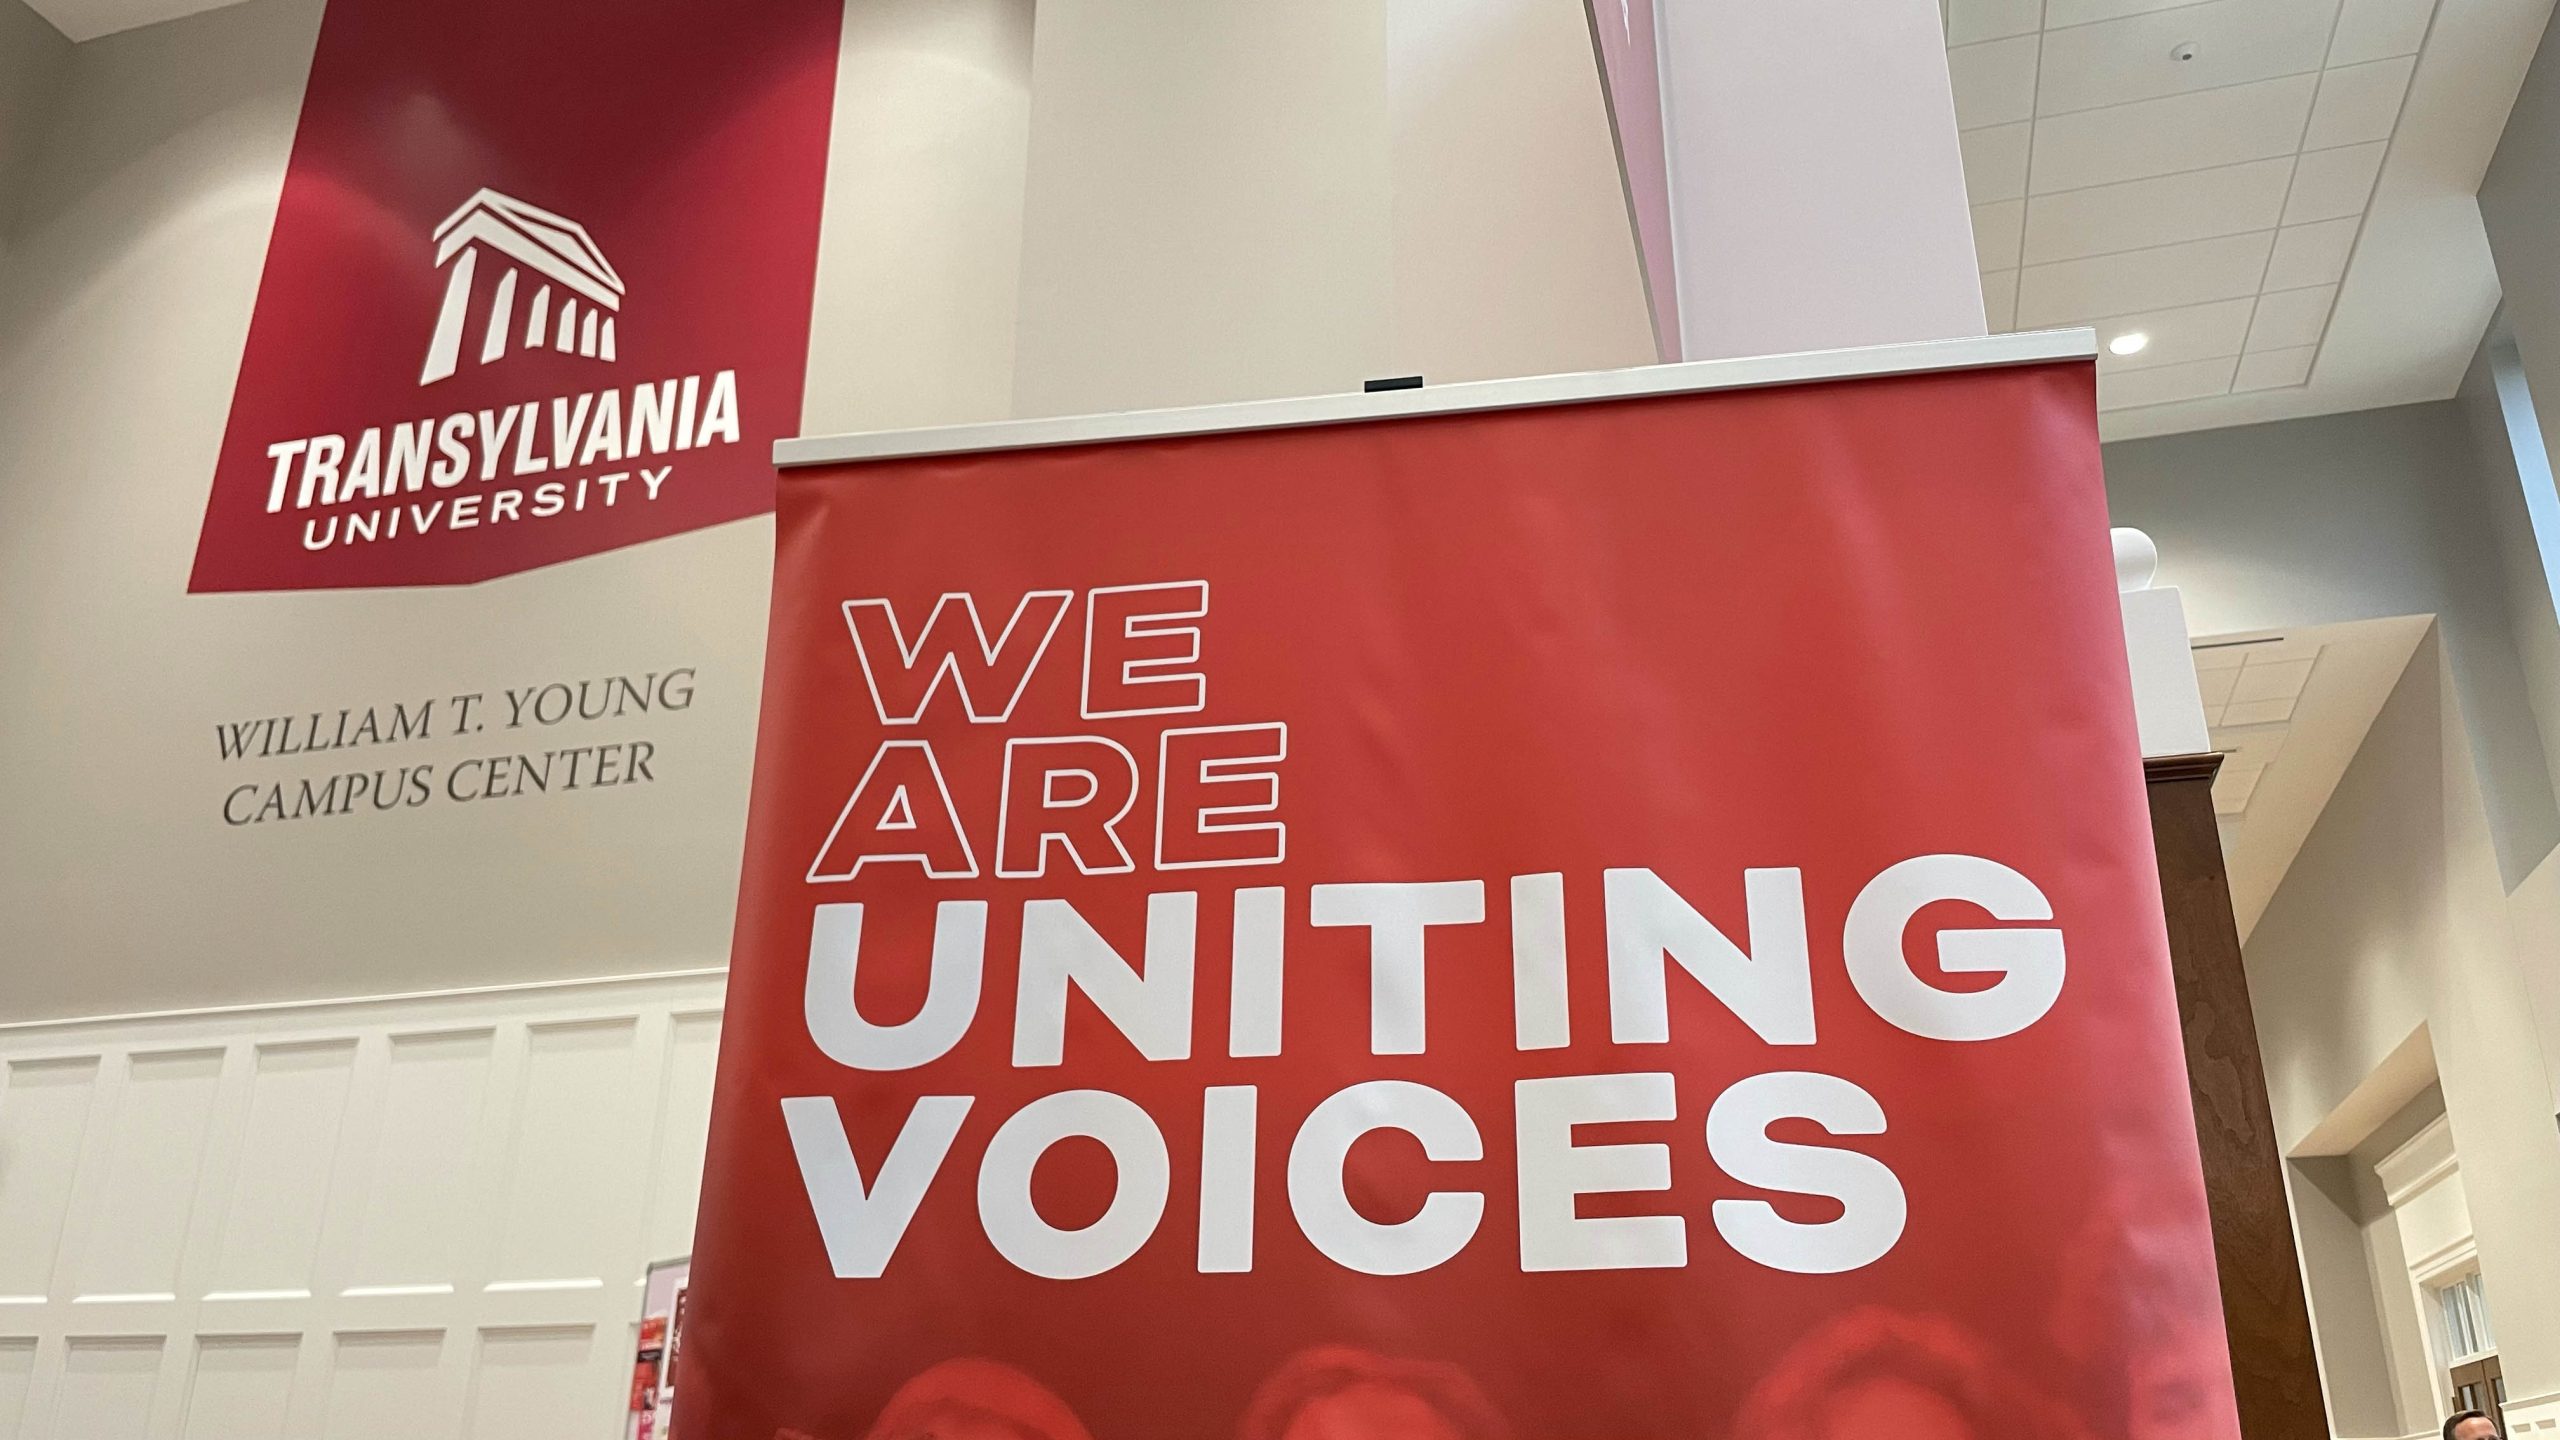 Uniting Voices partners with Transylvania to offer life-changing opportunities for young people to come together through music